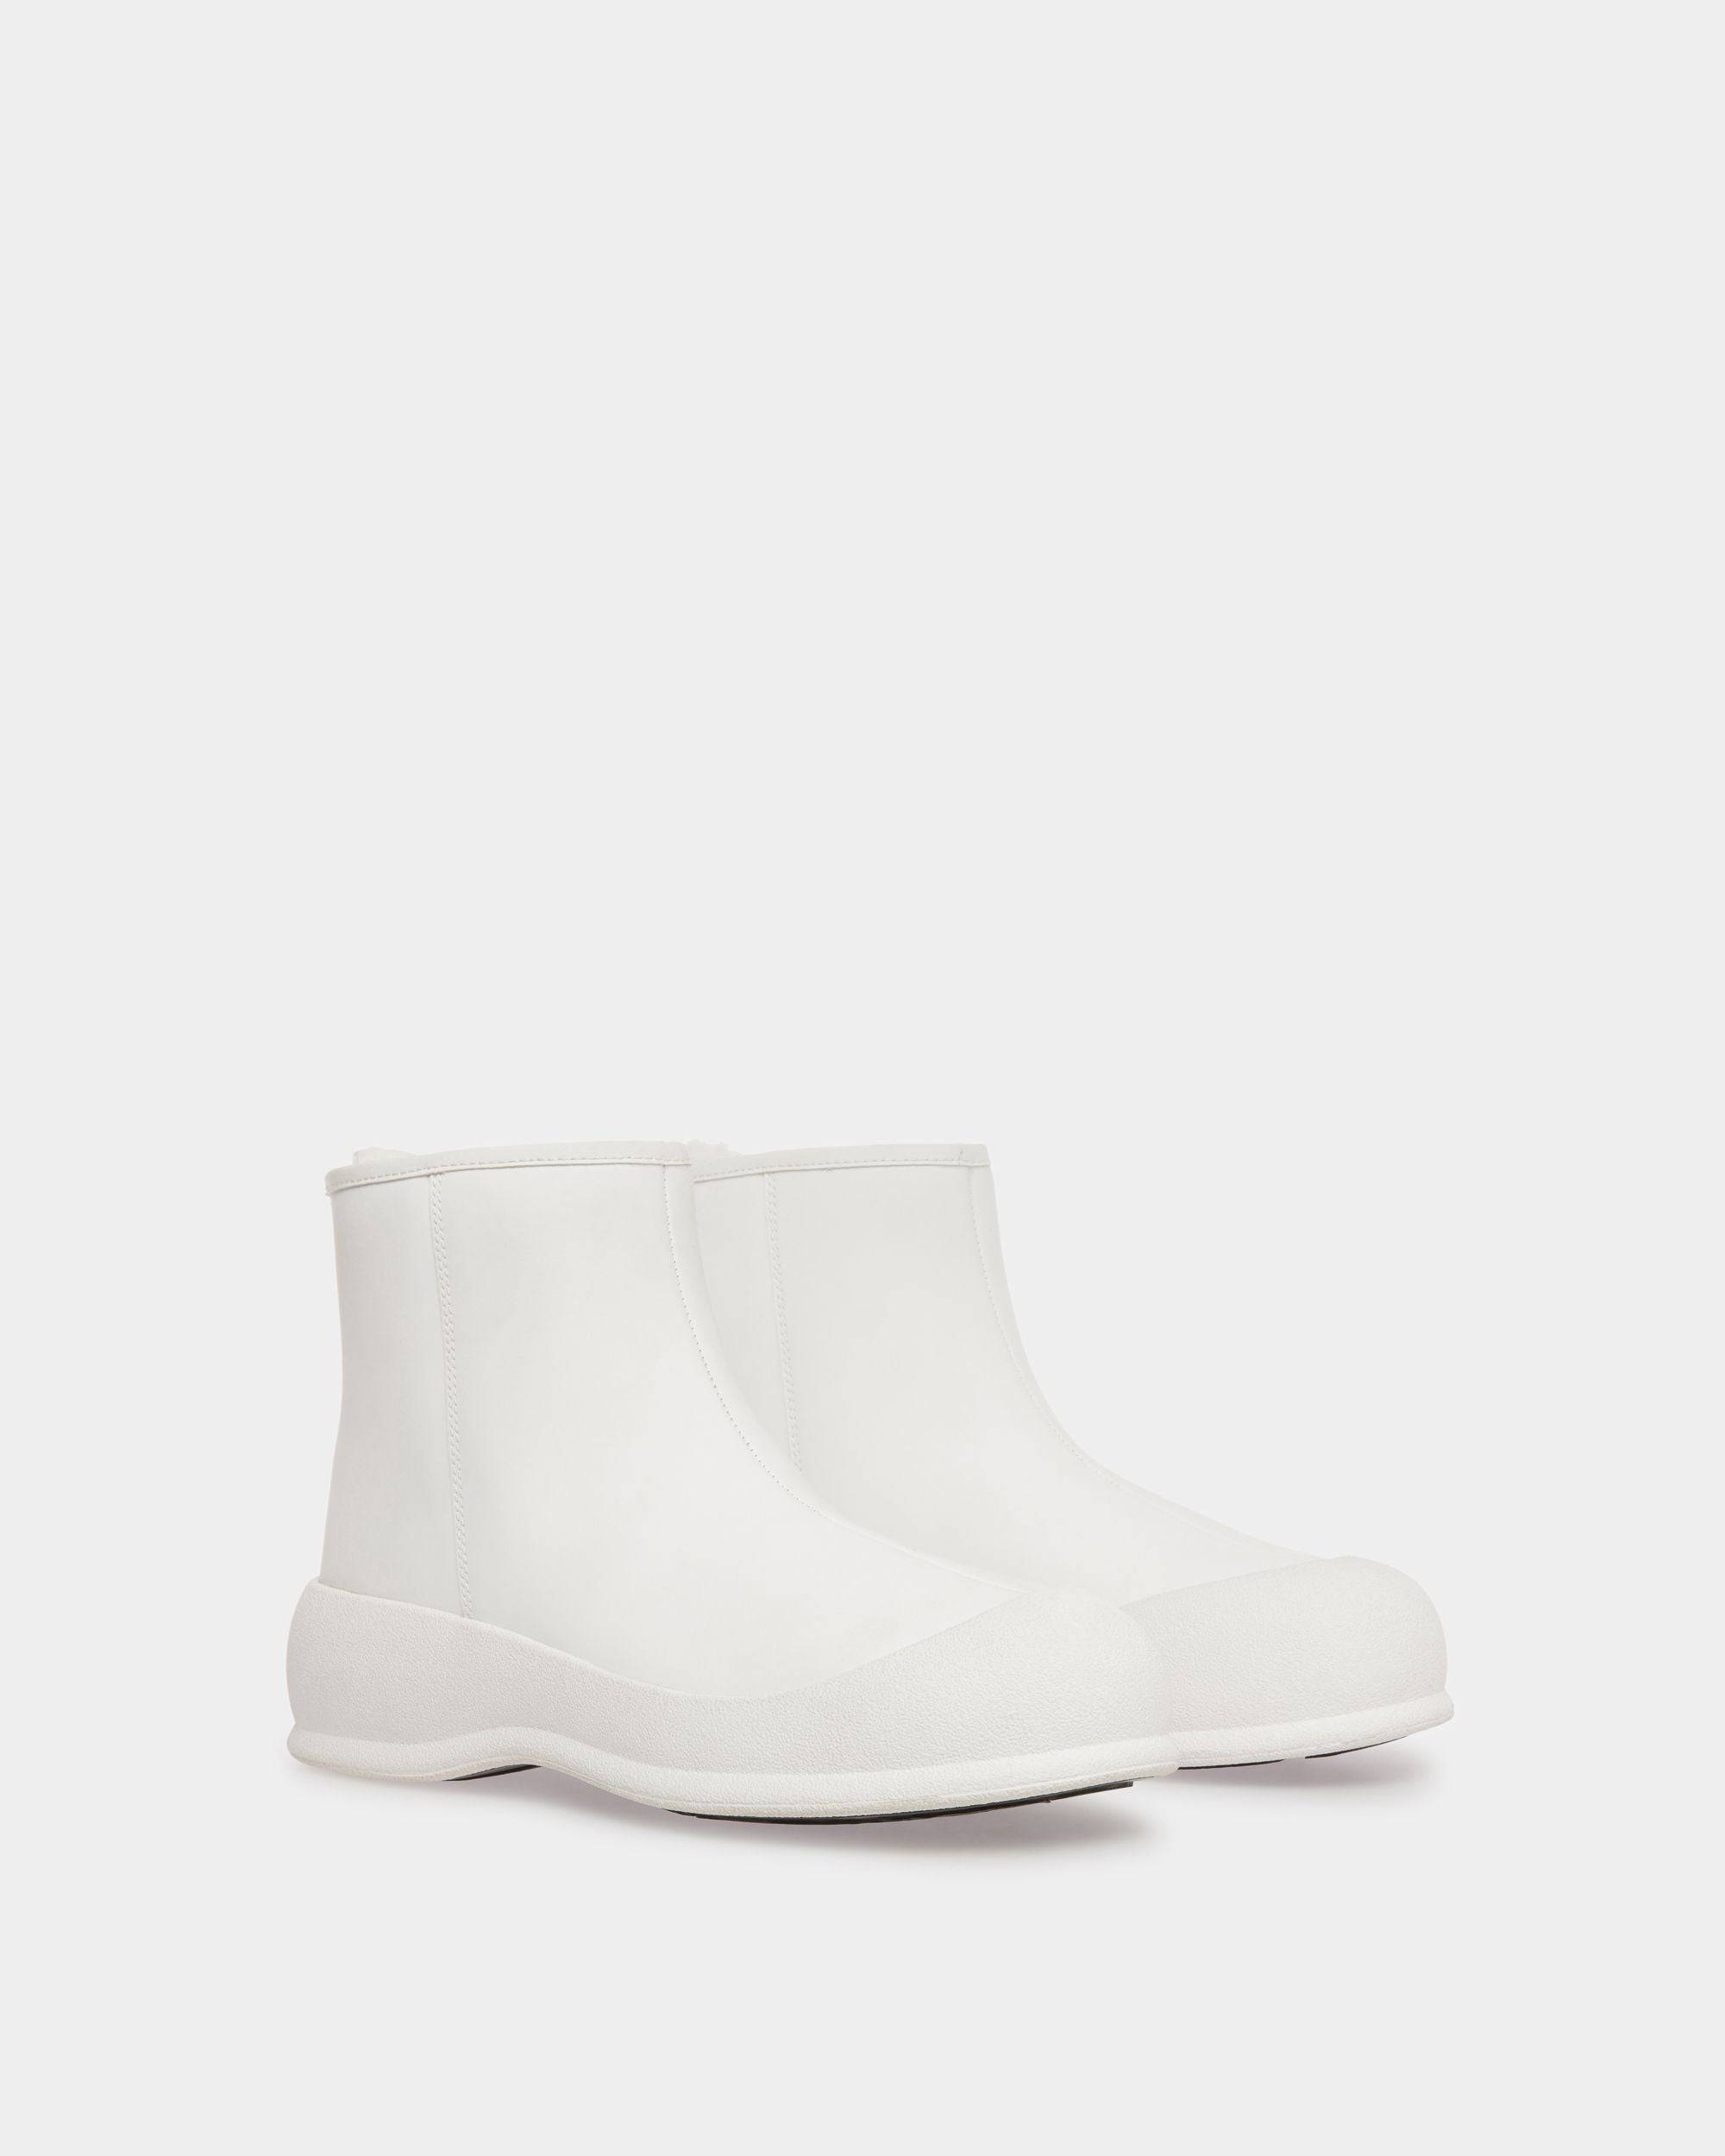 Carsey | Women's Booties | White Rubber-coated Leather | Bally | Still Life 3/4 Front